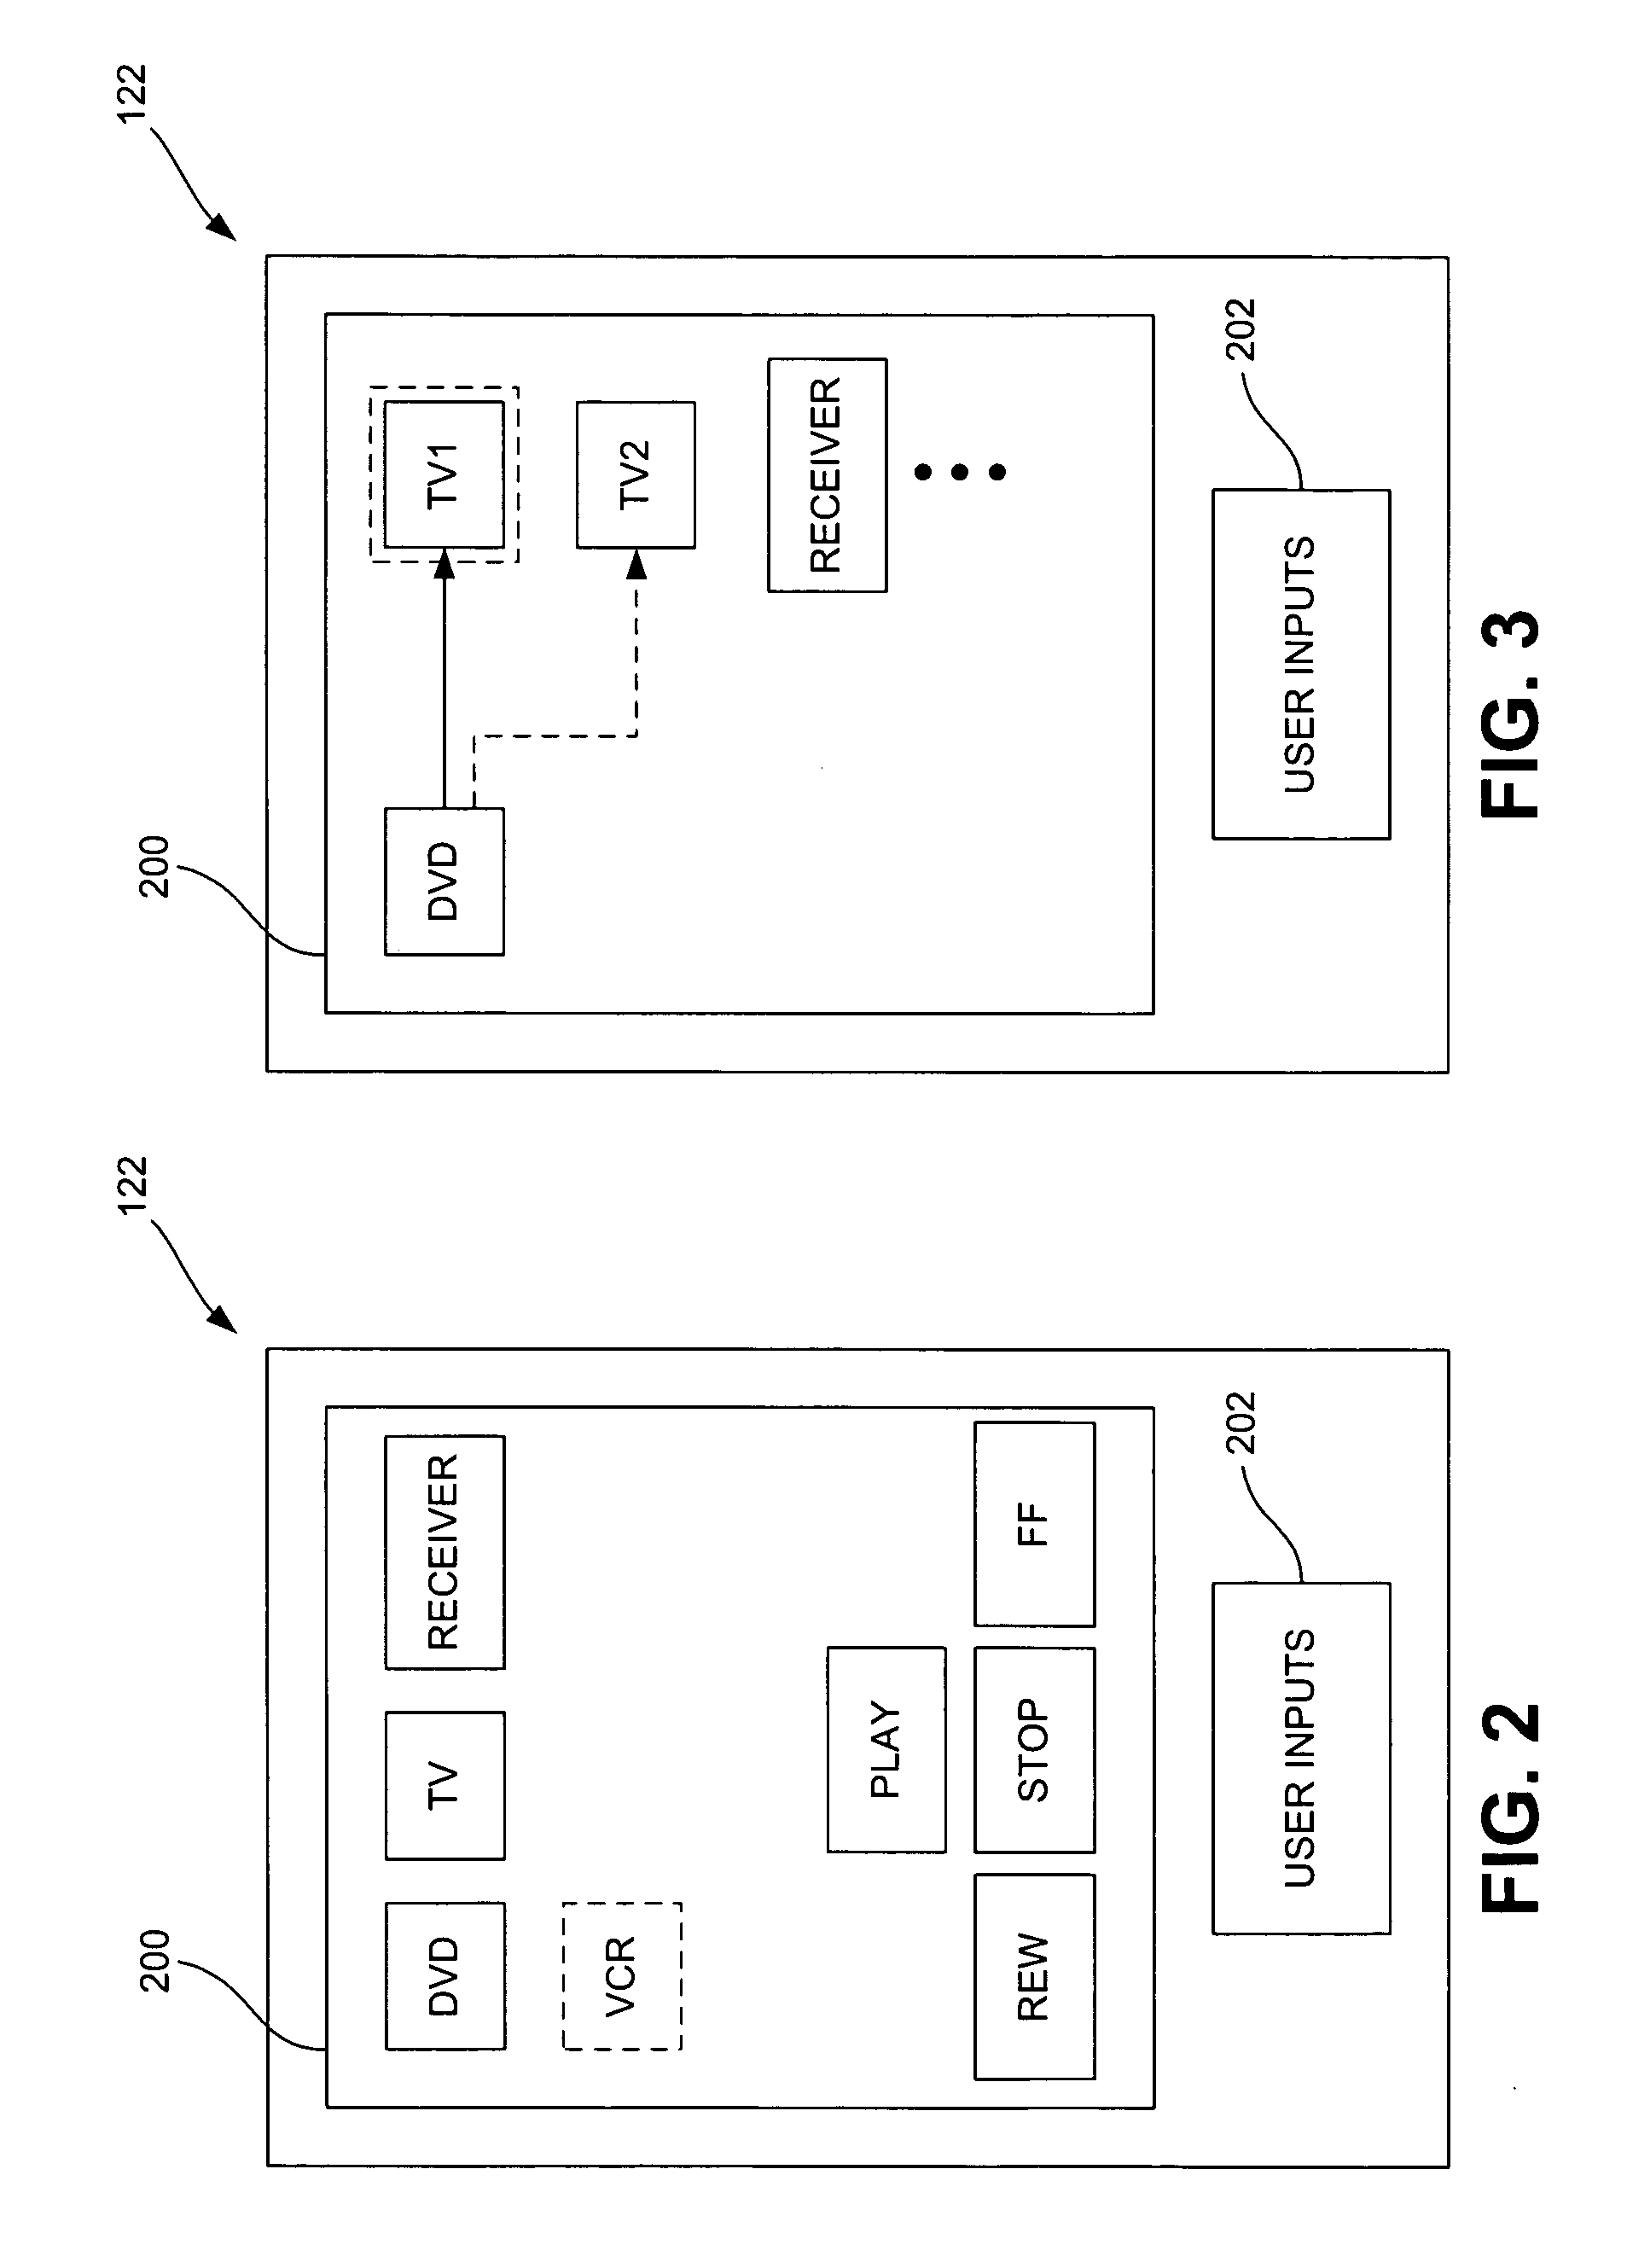 Wireless home entertainment interconnection and control system and method